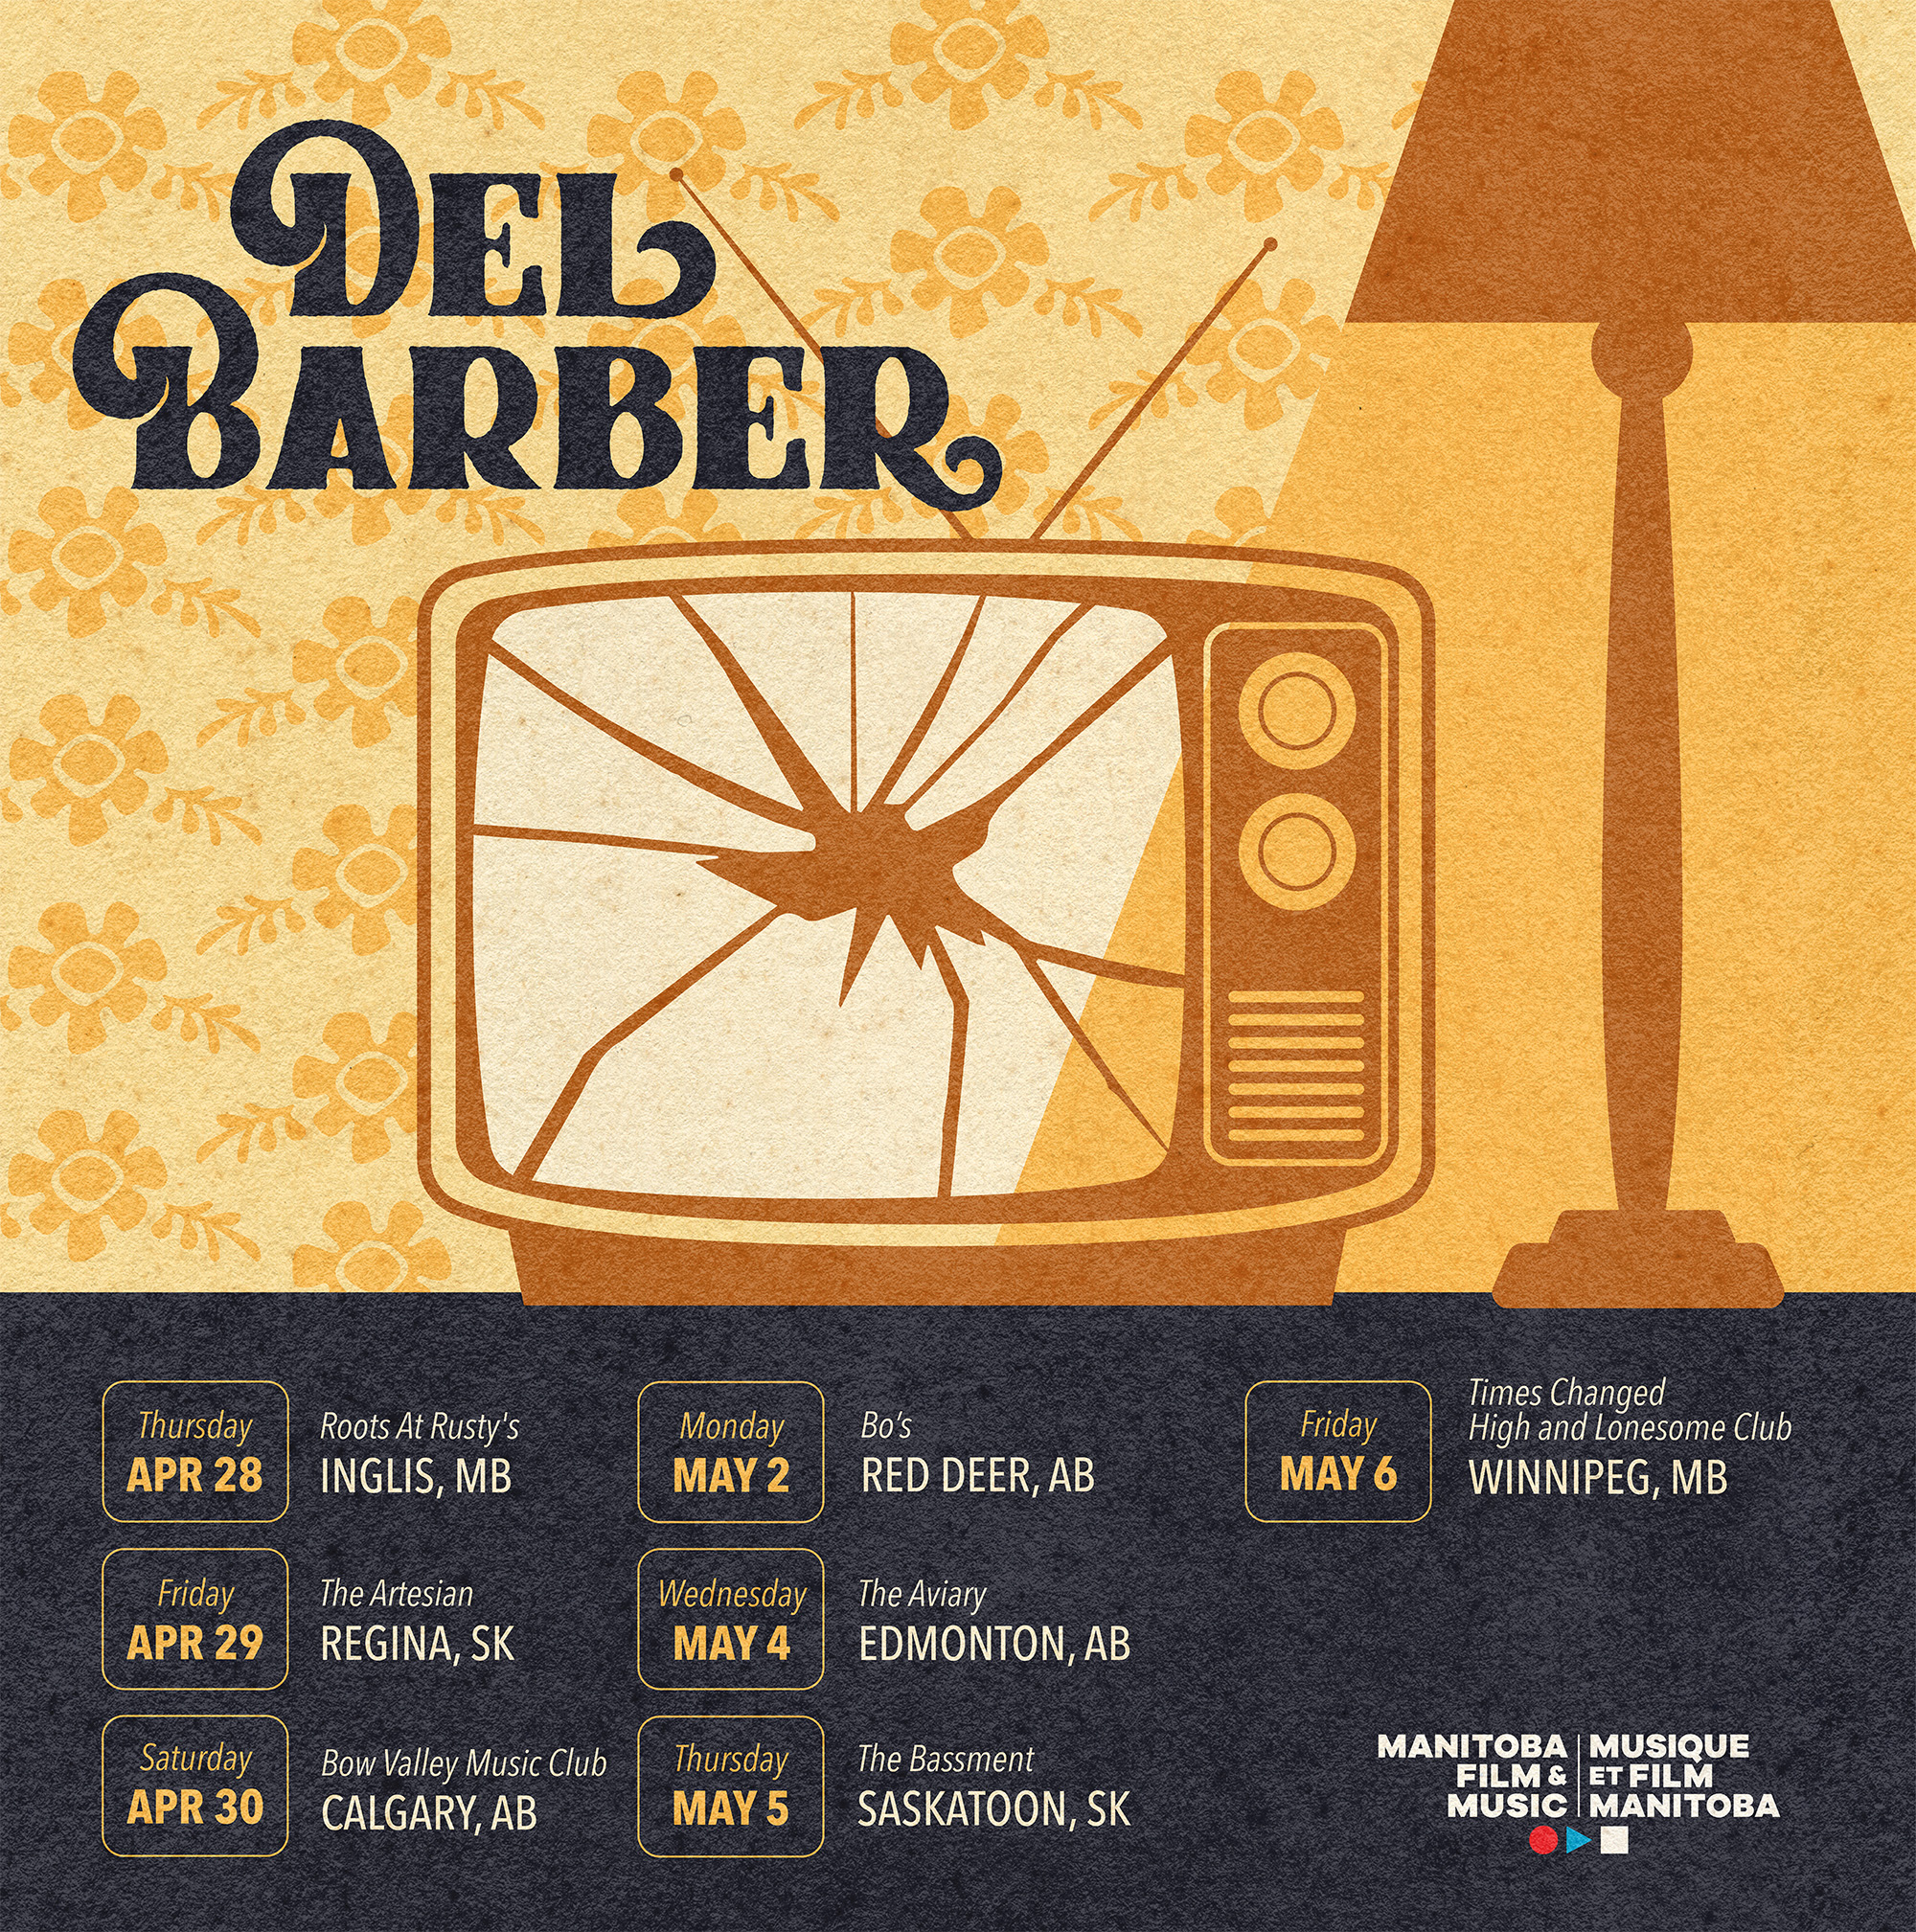 Del Barber presented by the Artesian